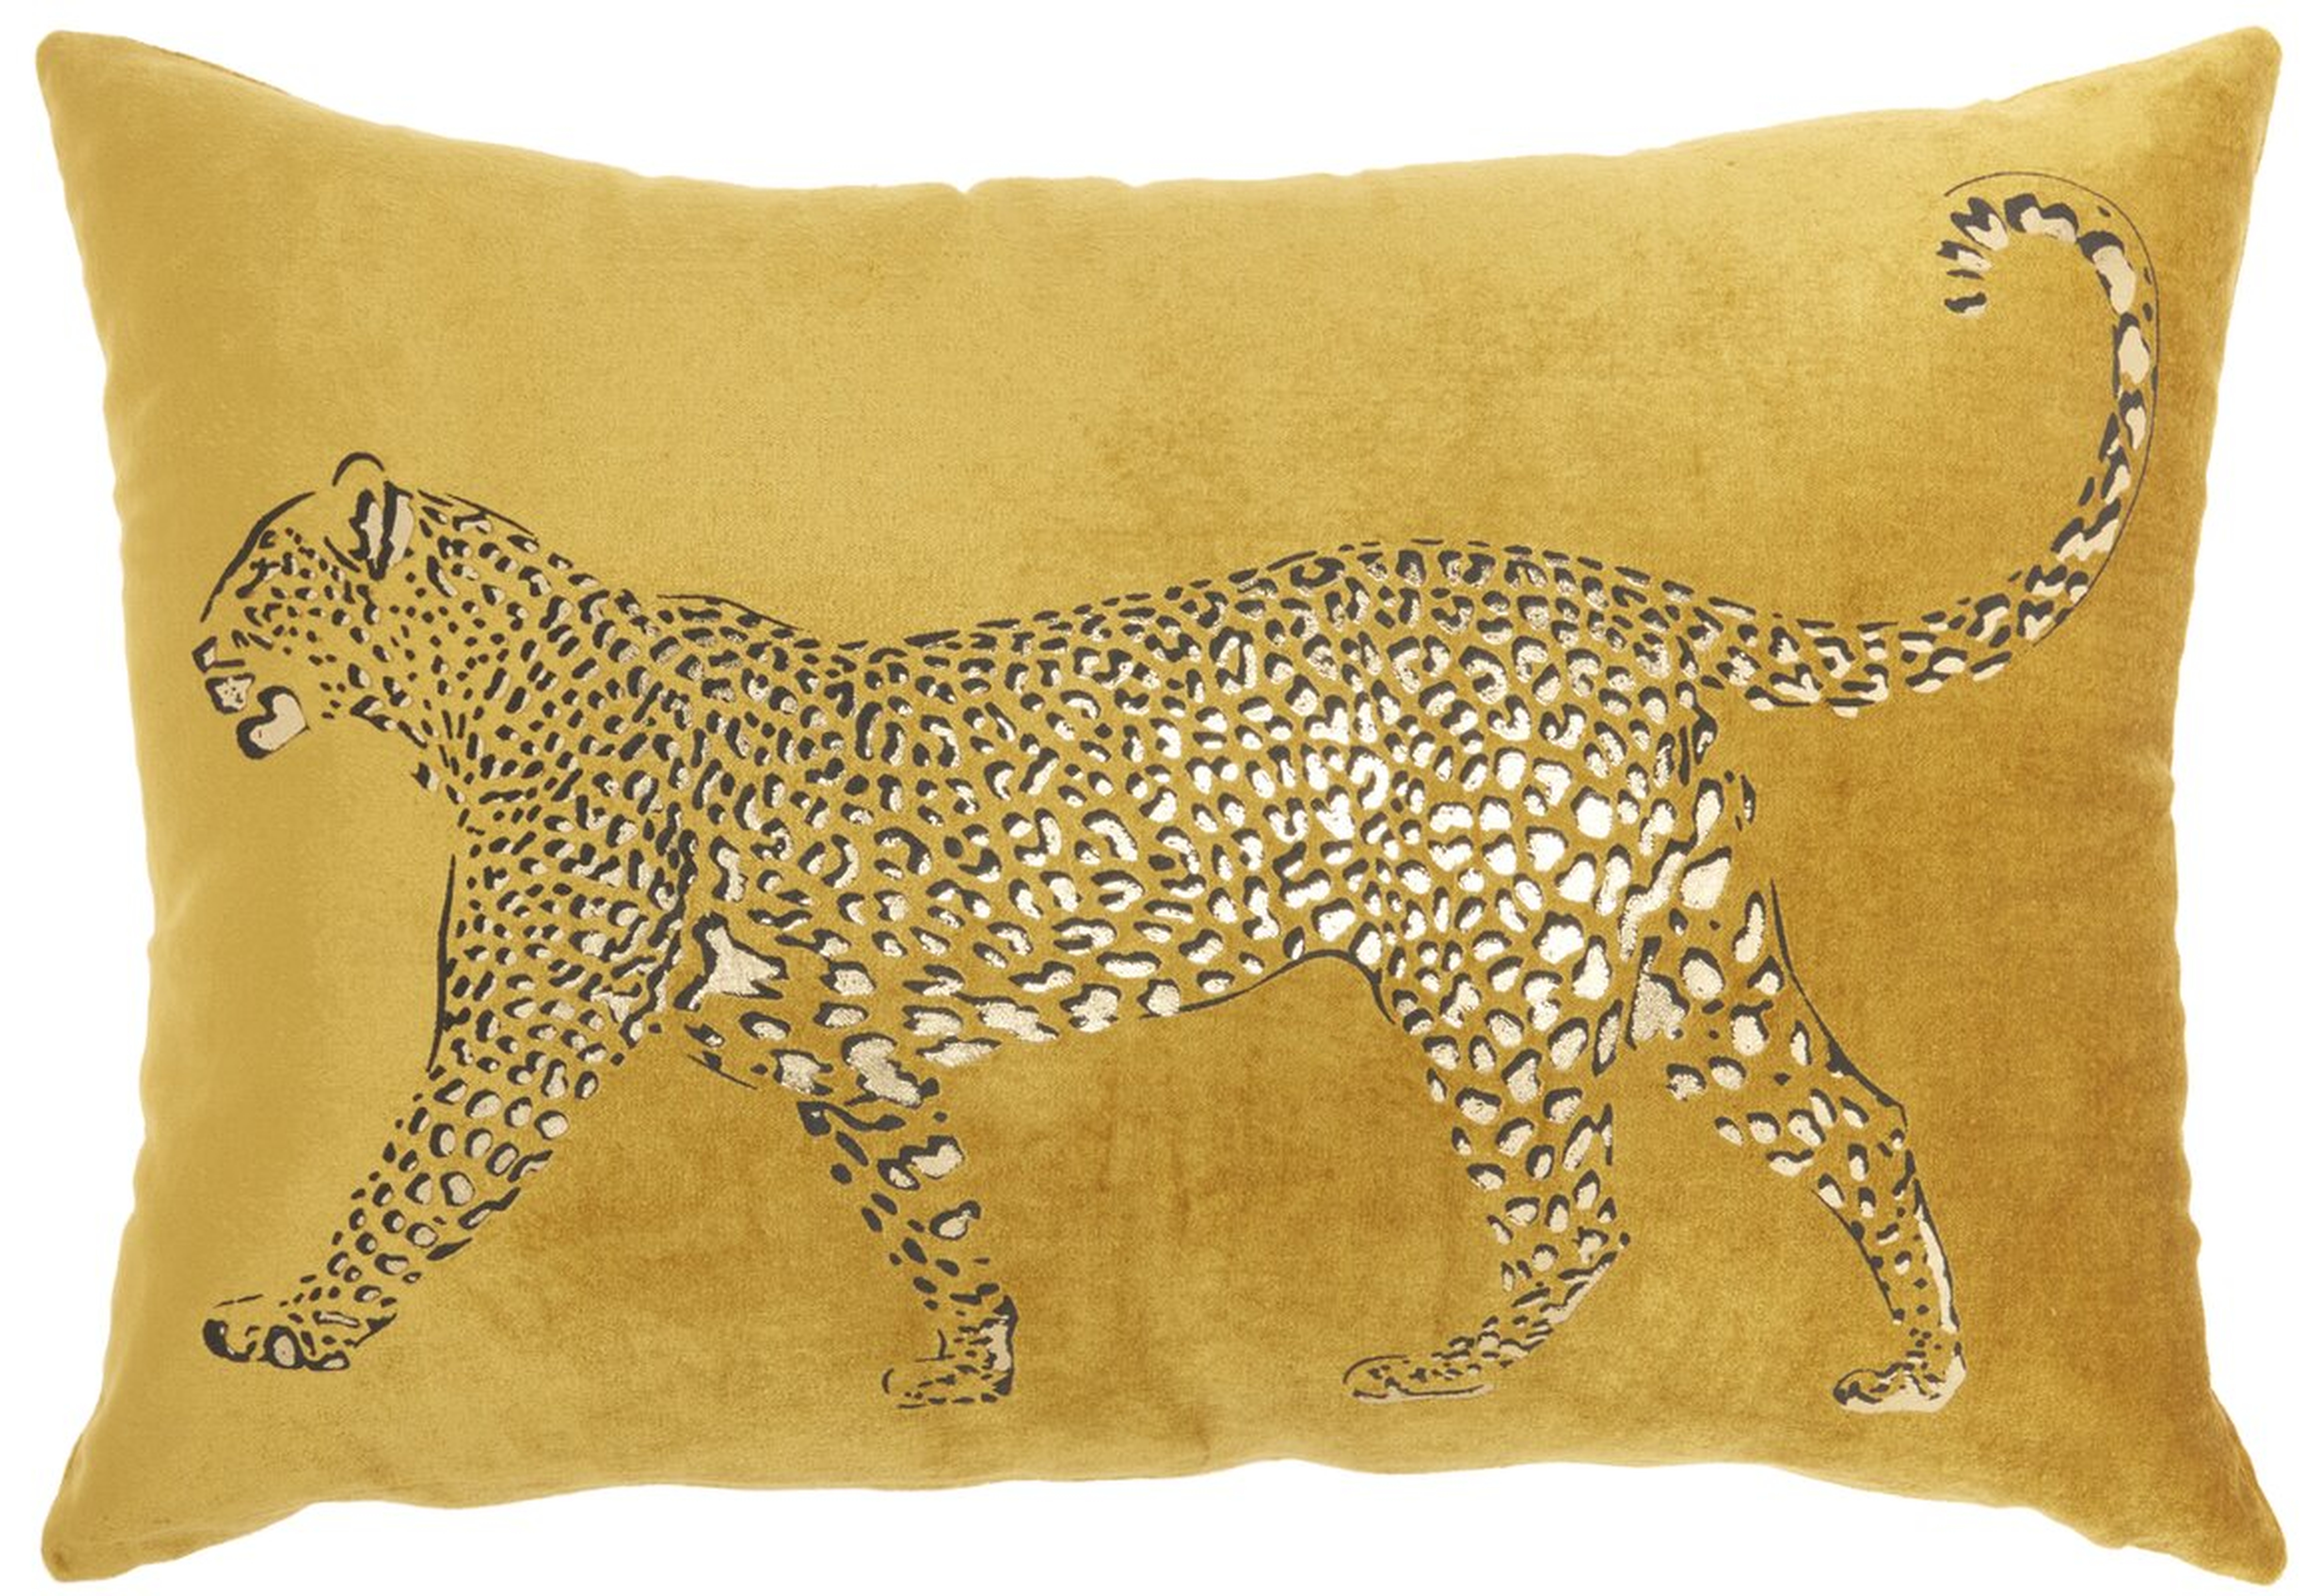 Solo Rugs Leopard Rectangular Pillow Cover & Insert Color: Gold - Perigold